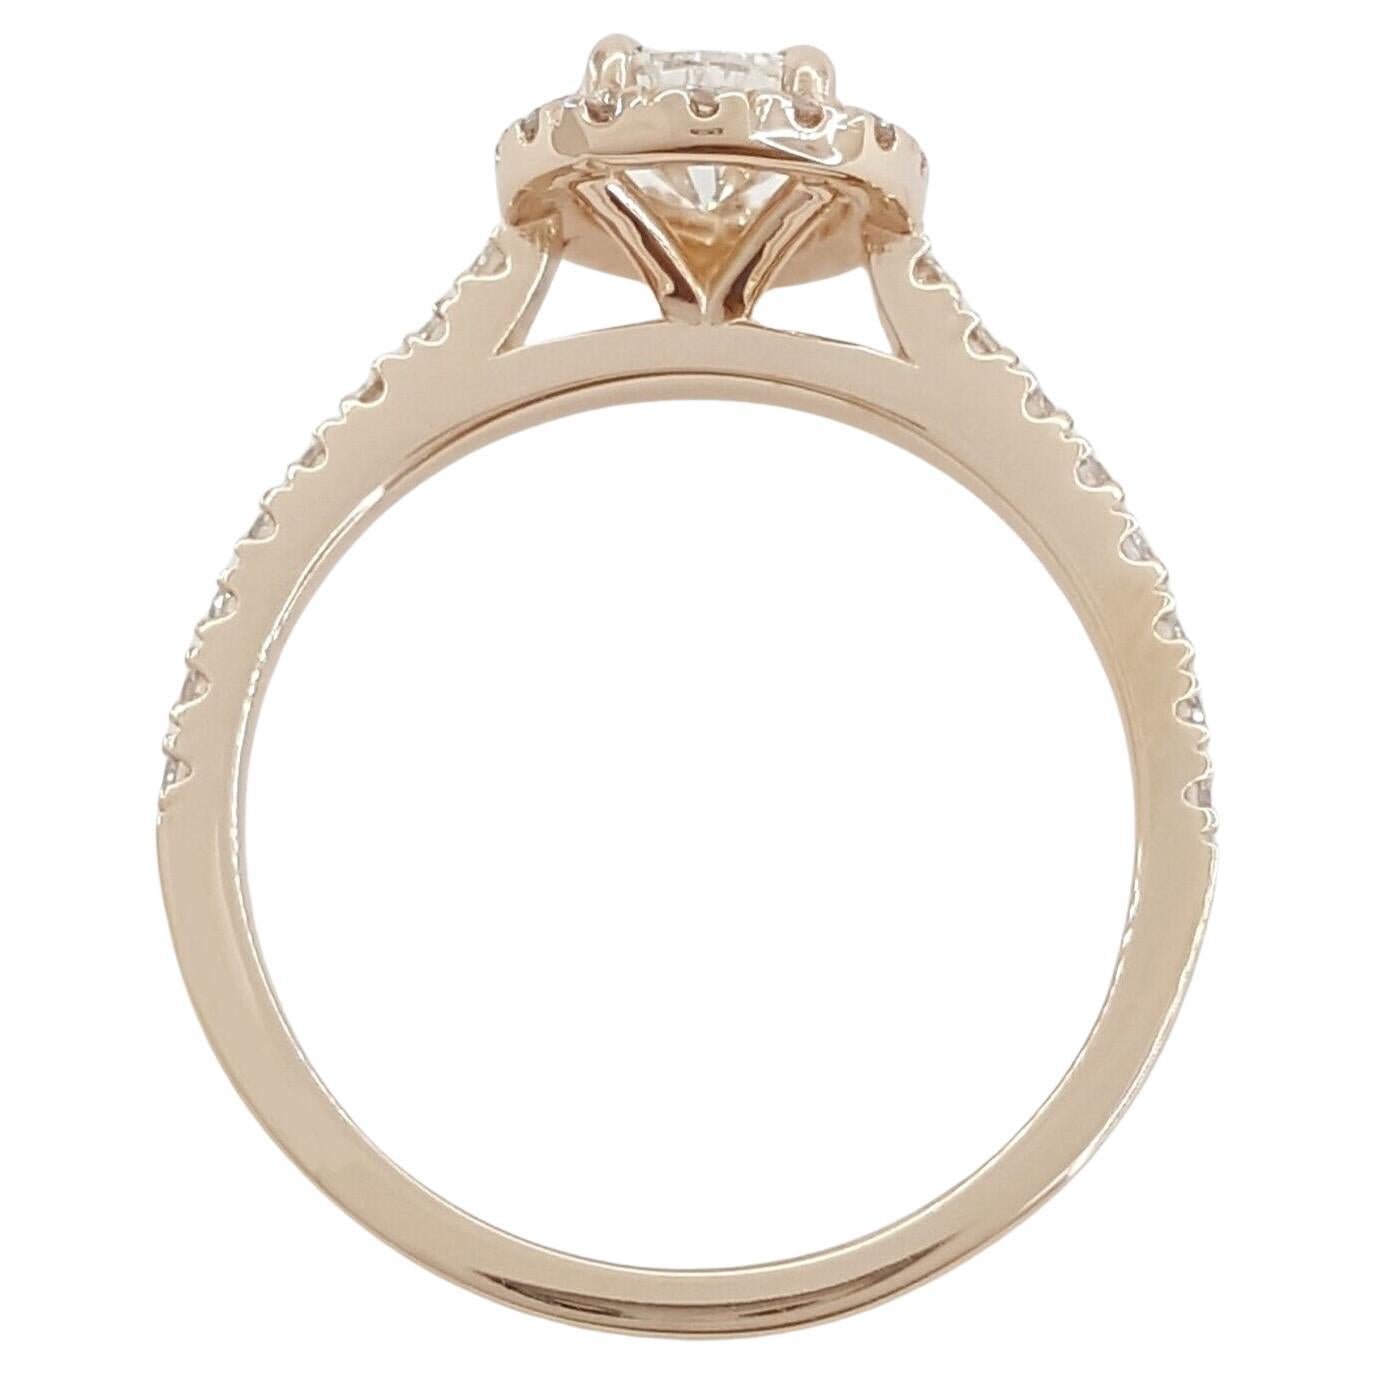 Presenting an exquisite 1.4-carat total weight Pear Brilliant Cut Diamond Halo Engagement Ring in elegant 14k Rose Gold.

This beautifully crafted ring has a total weight of 2.8 grams and is designed in a size 6. The centerpiece of this ring is a